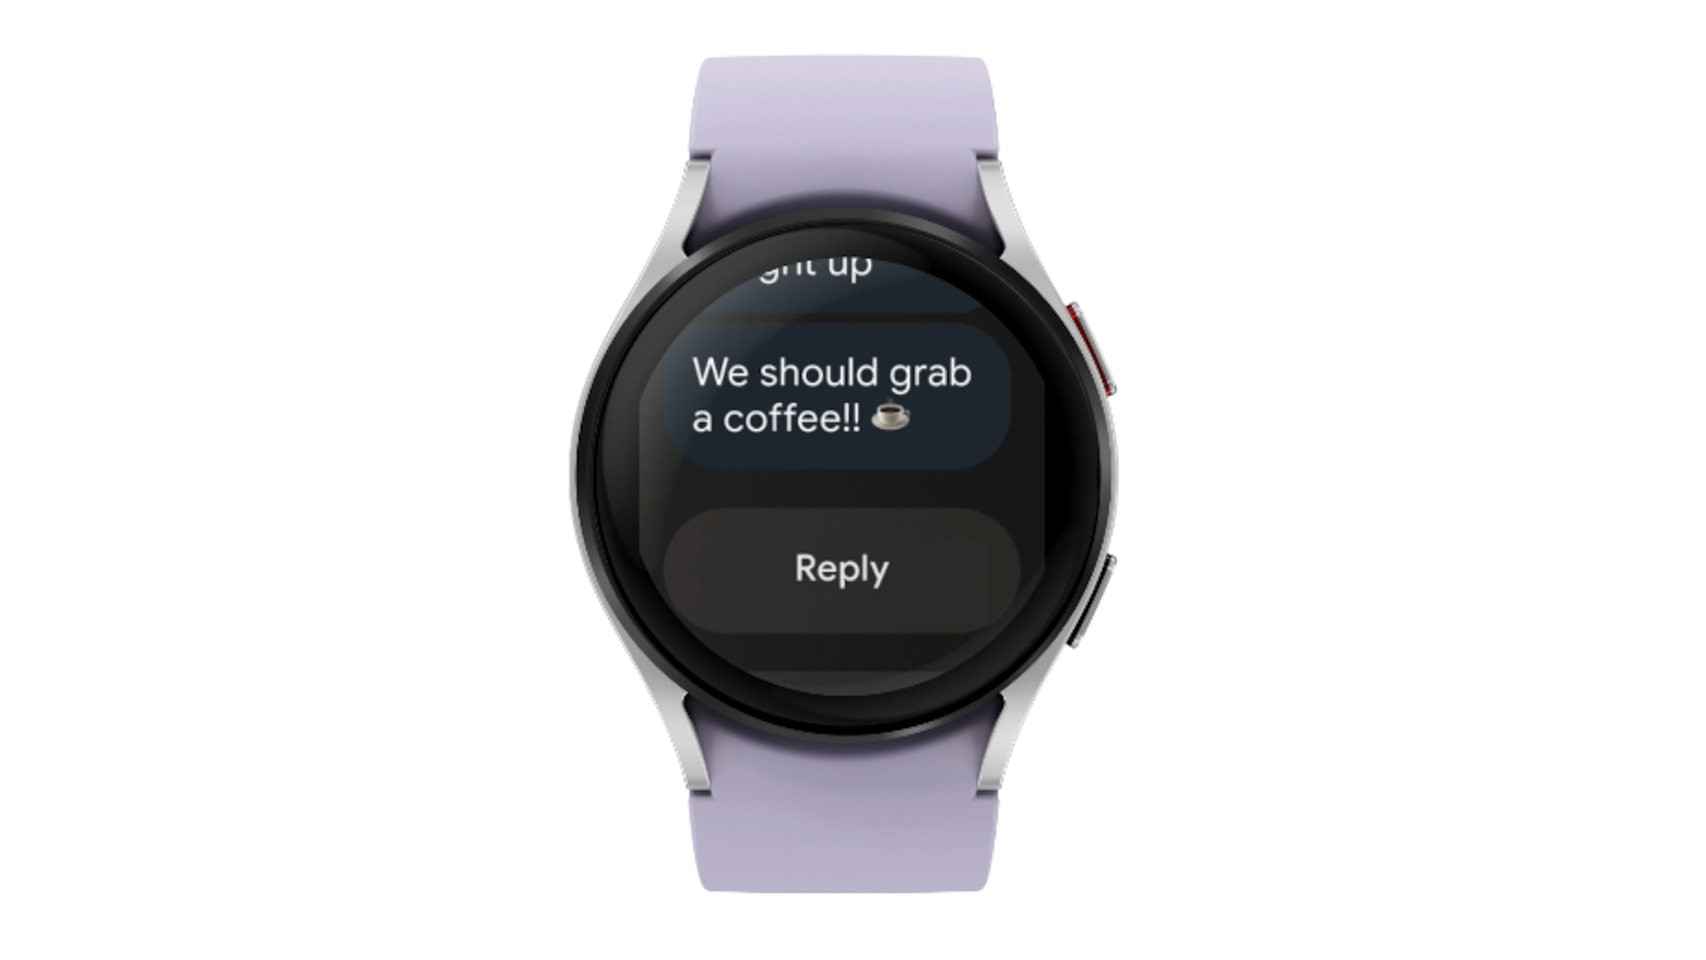 New WhatsApp app for Wear OS watches